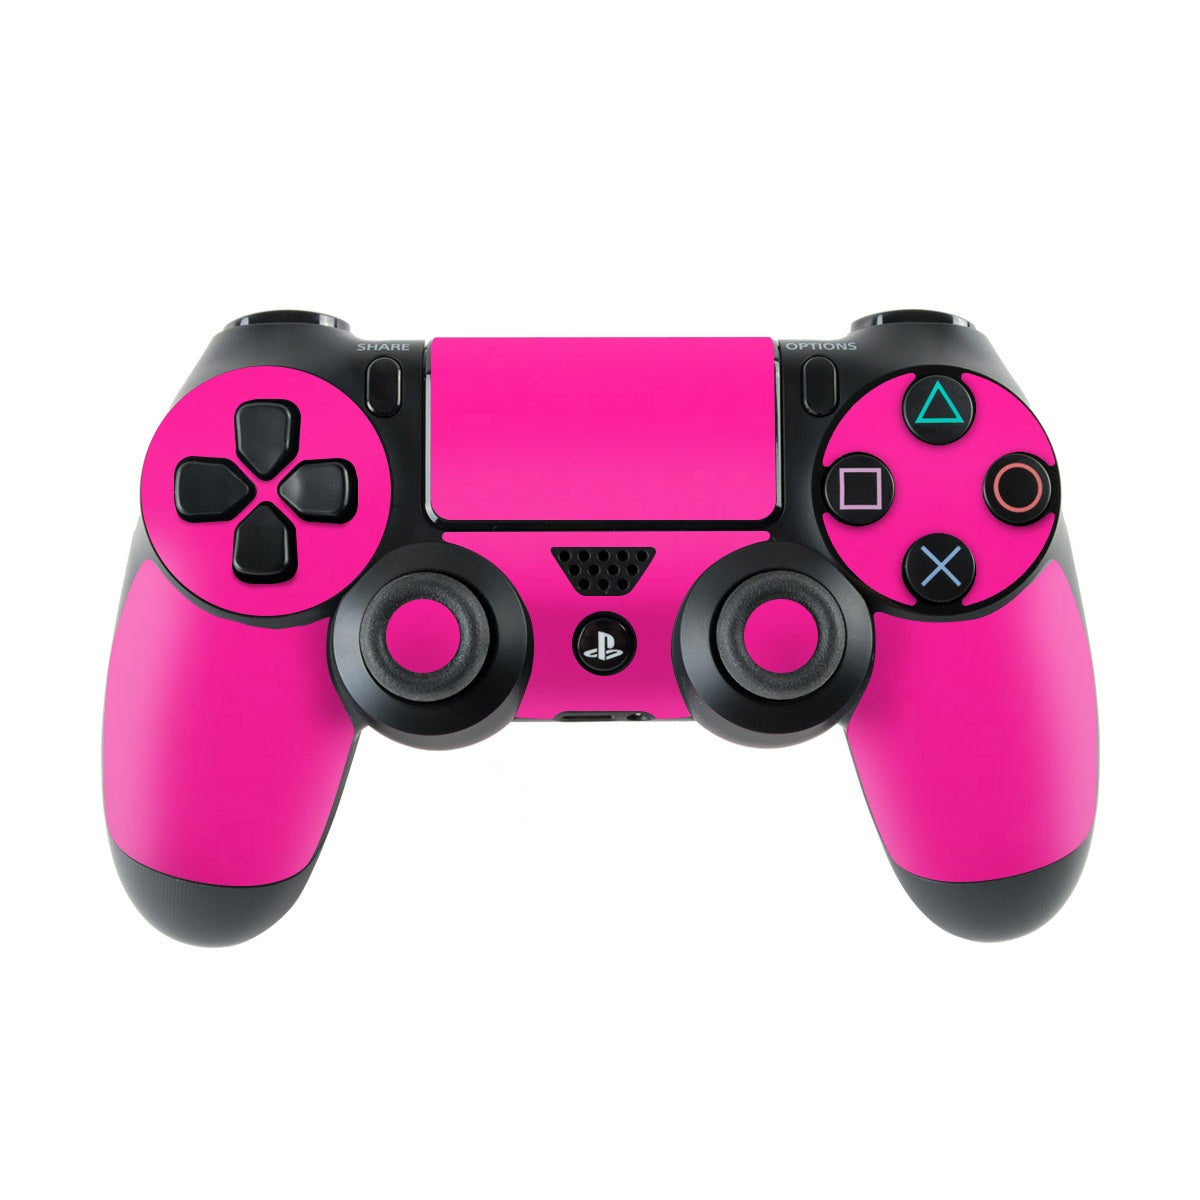 Solid State Malibu Pink - Sony PS4 Controller Skin